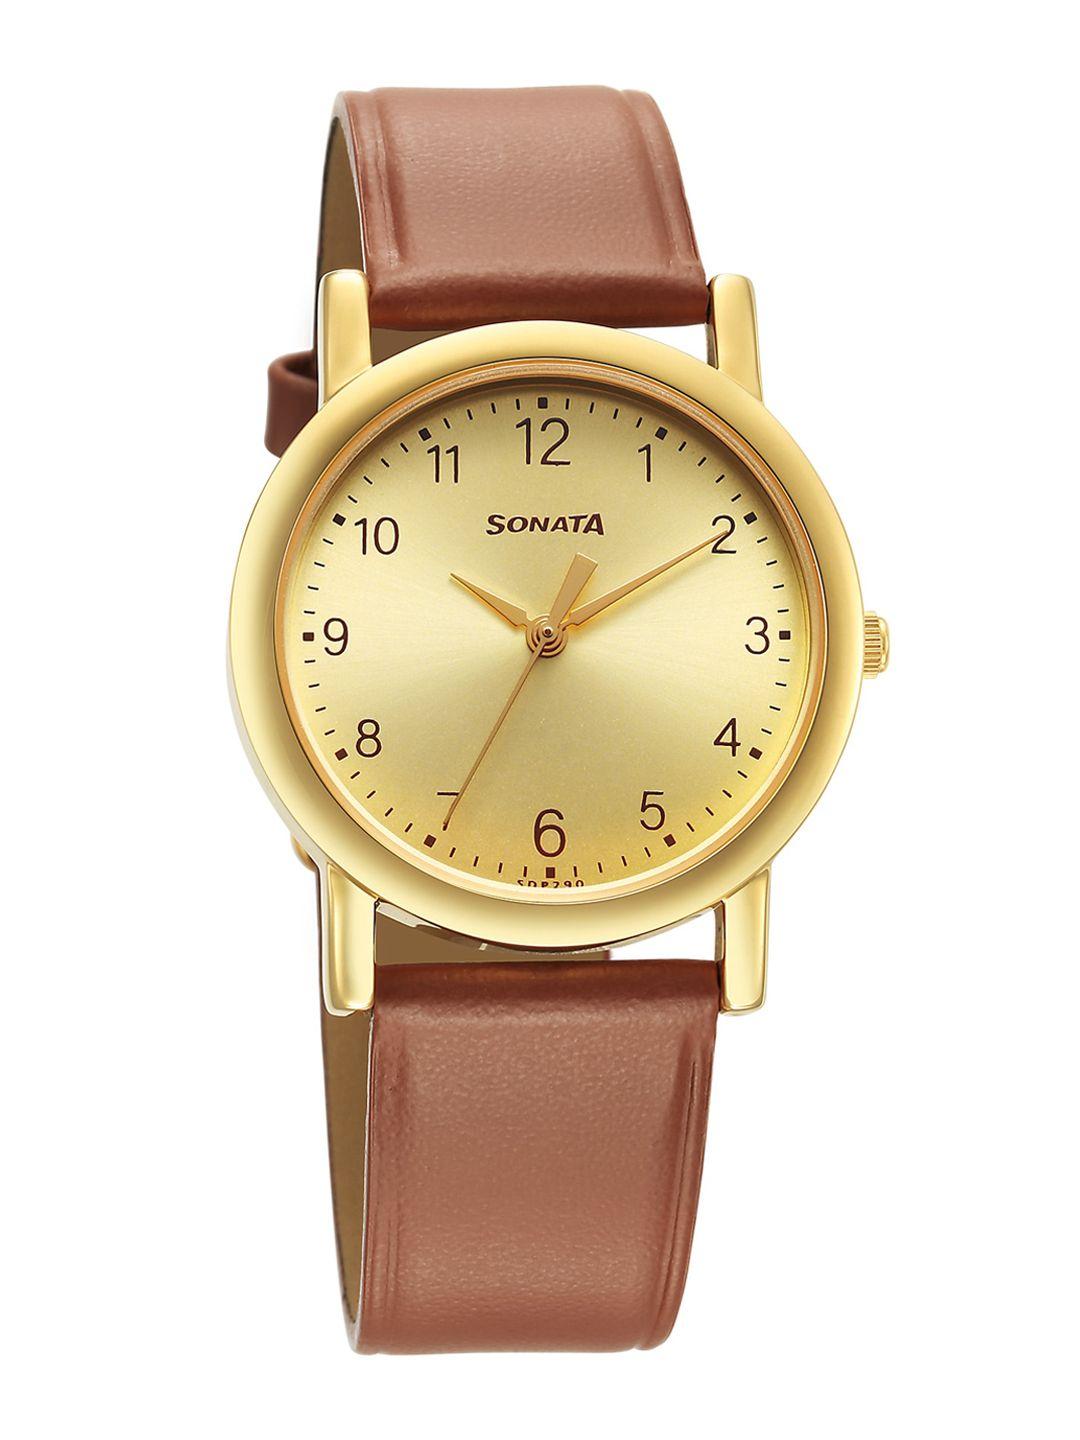 sonata classique collection men brass dial & leather straps analogue watch 7987yl08w